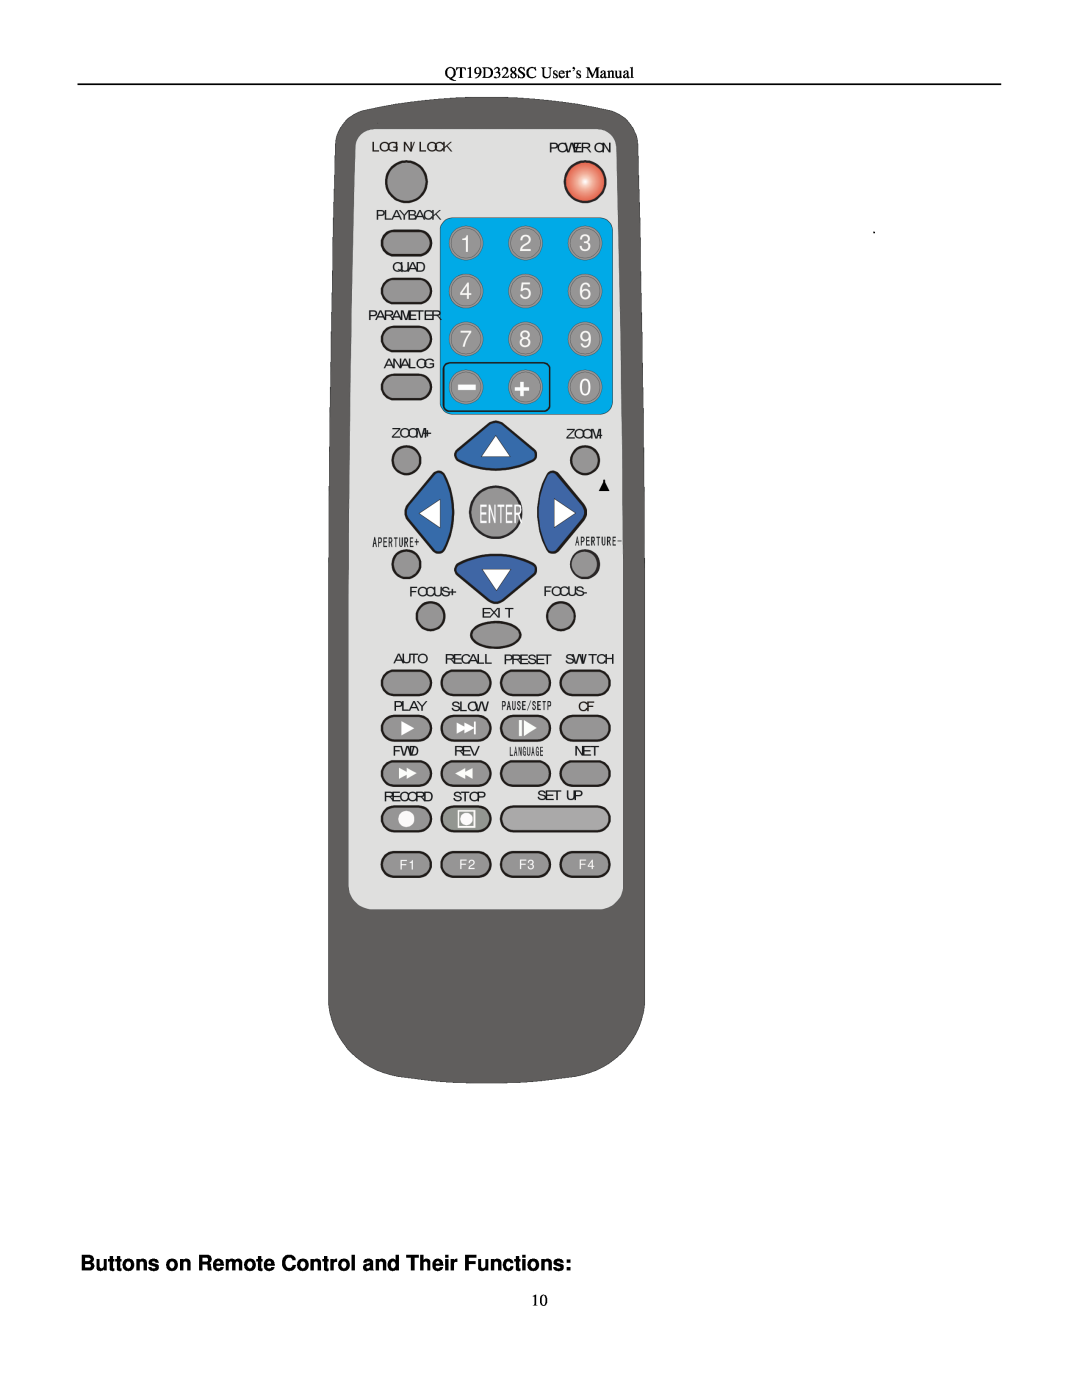 Q-See QT17D324SC Buttons on Remote Control and Their Functions, QT19D328SC User’s Manual, Logi N/ Lock, Playback, Quad 